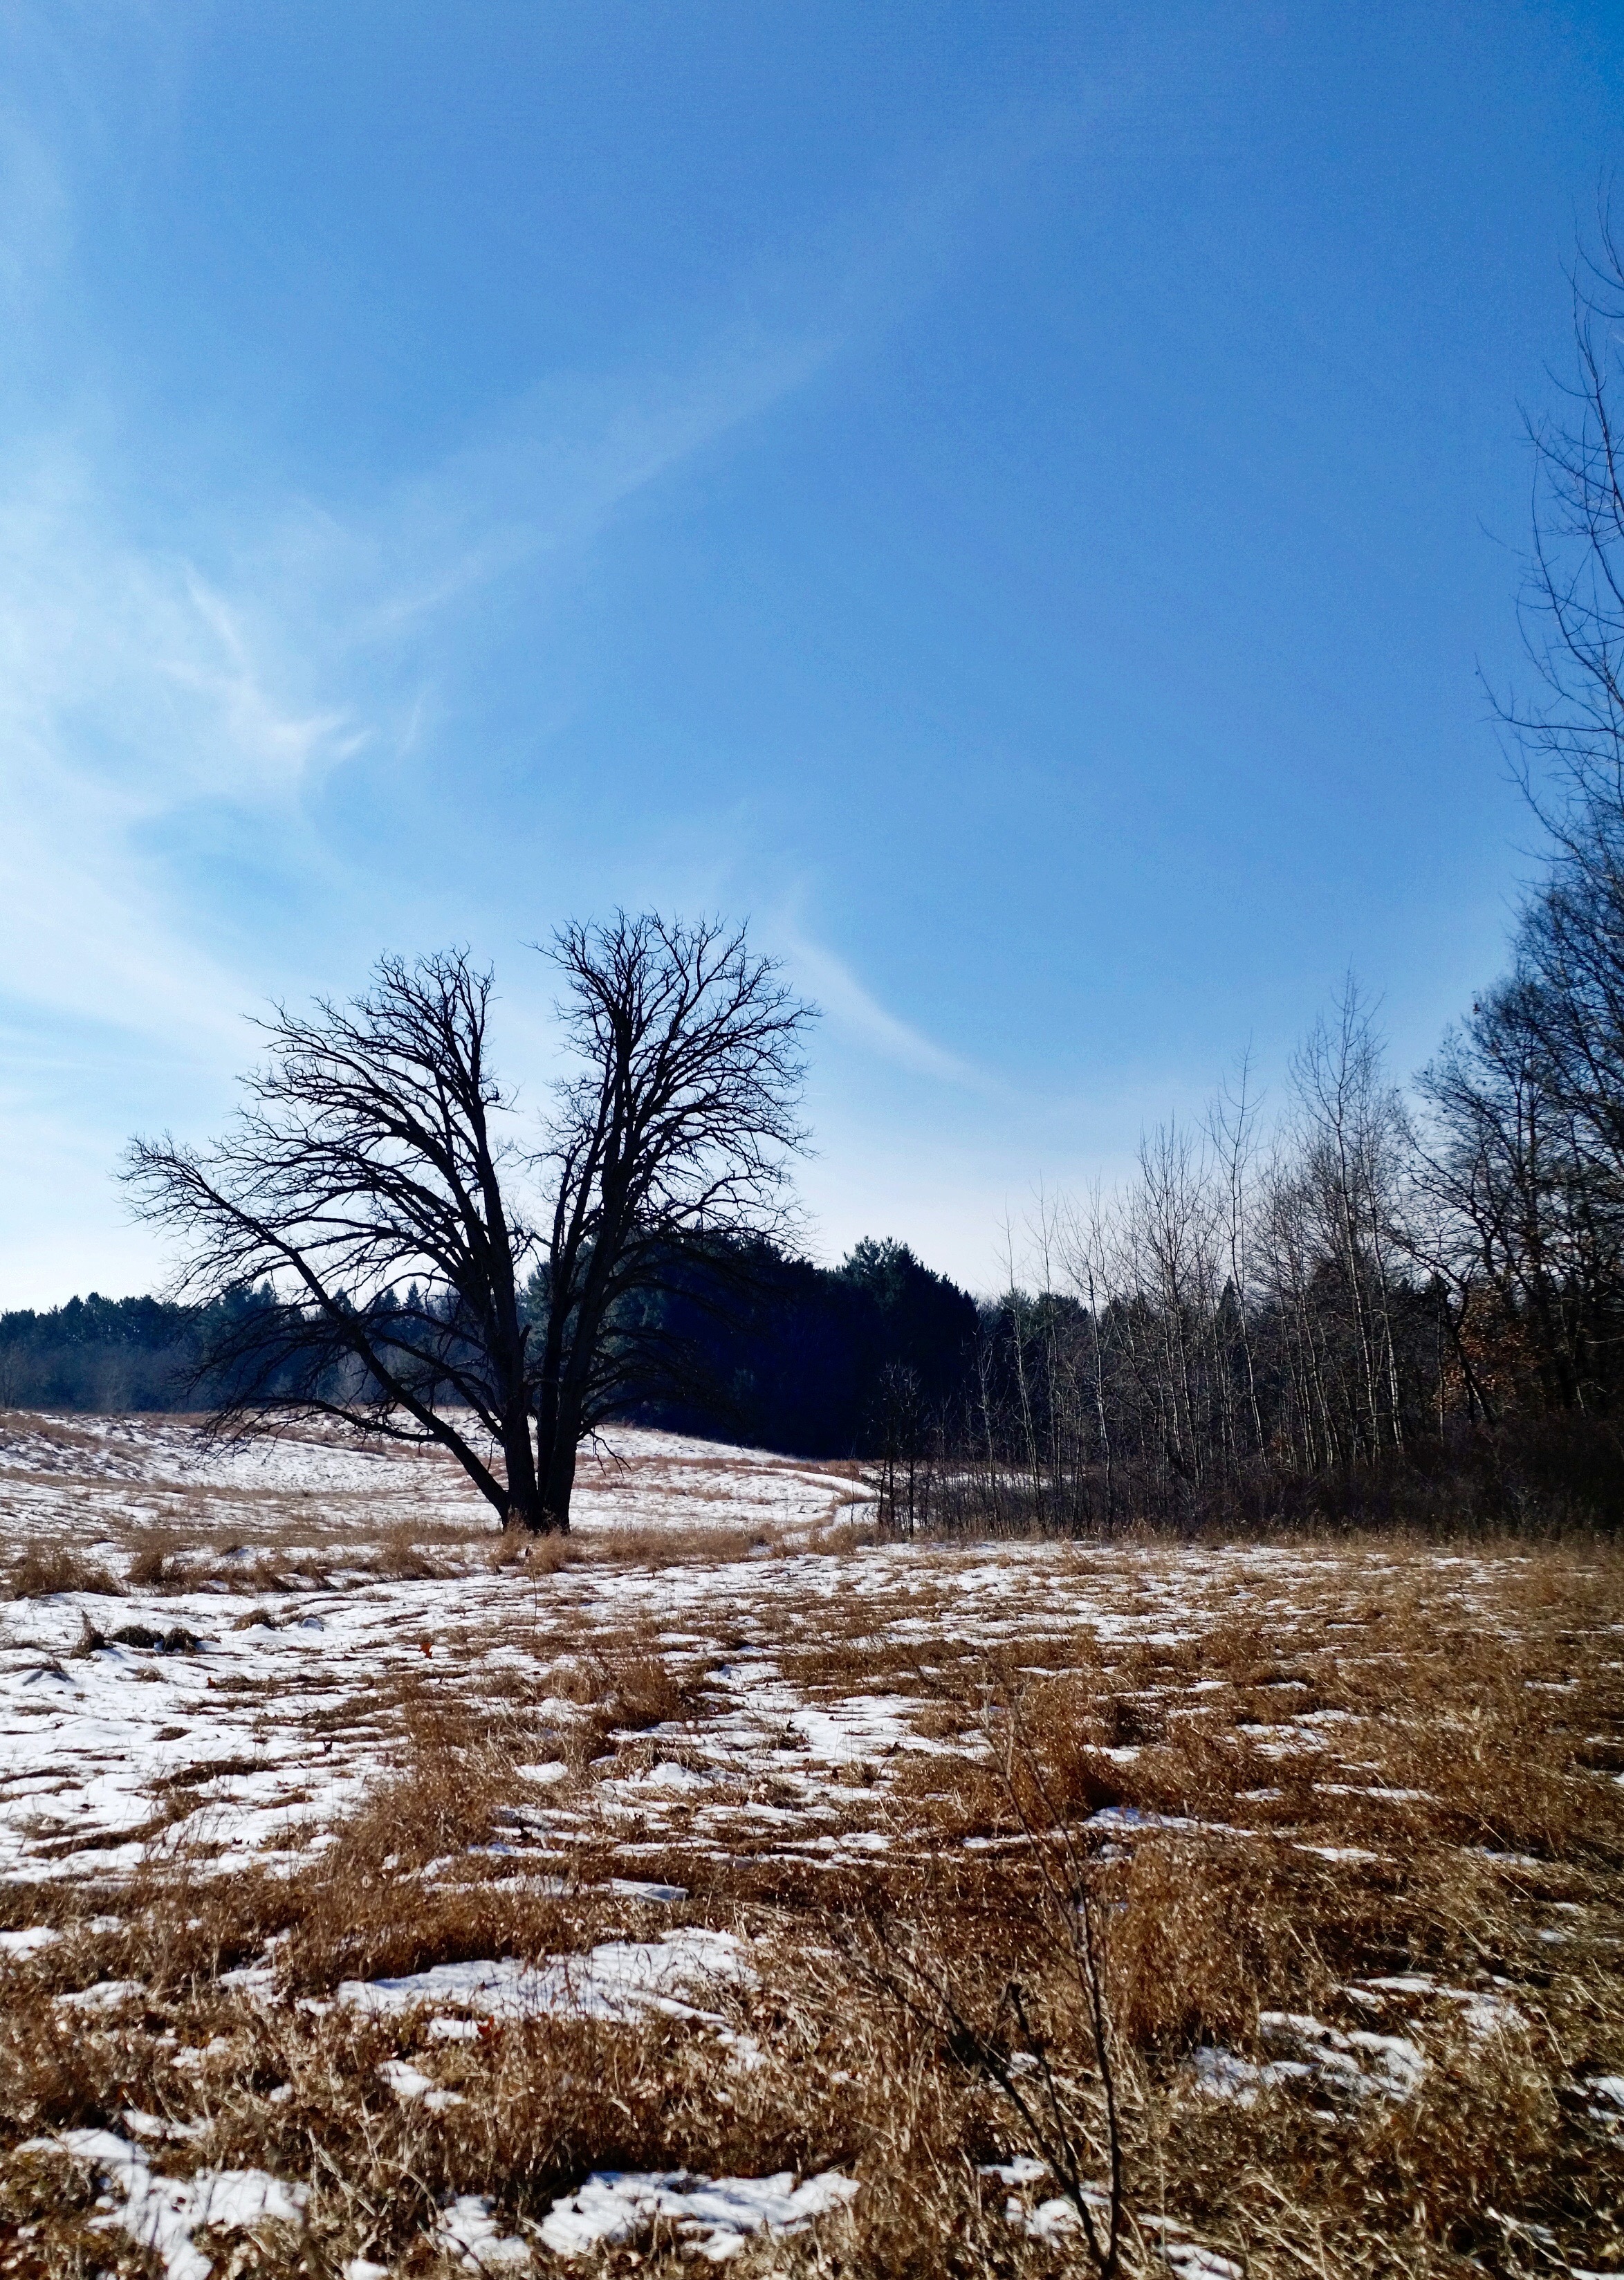 A bare tree standing in a field of brown grass partially covered with snow under a blue sky